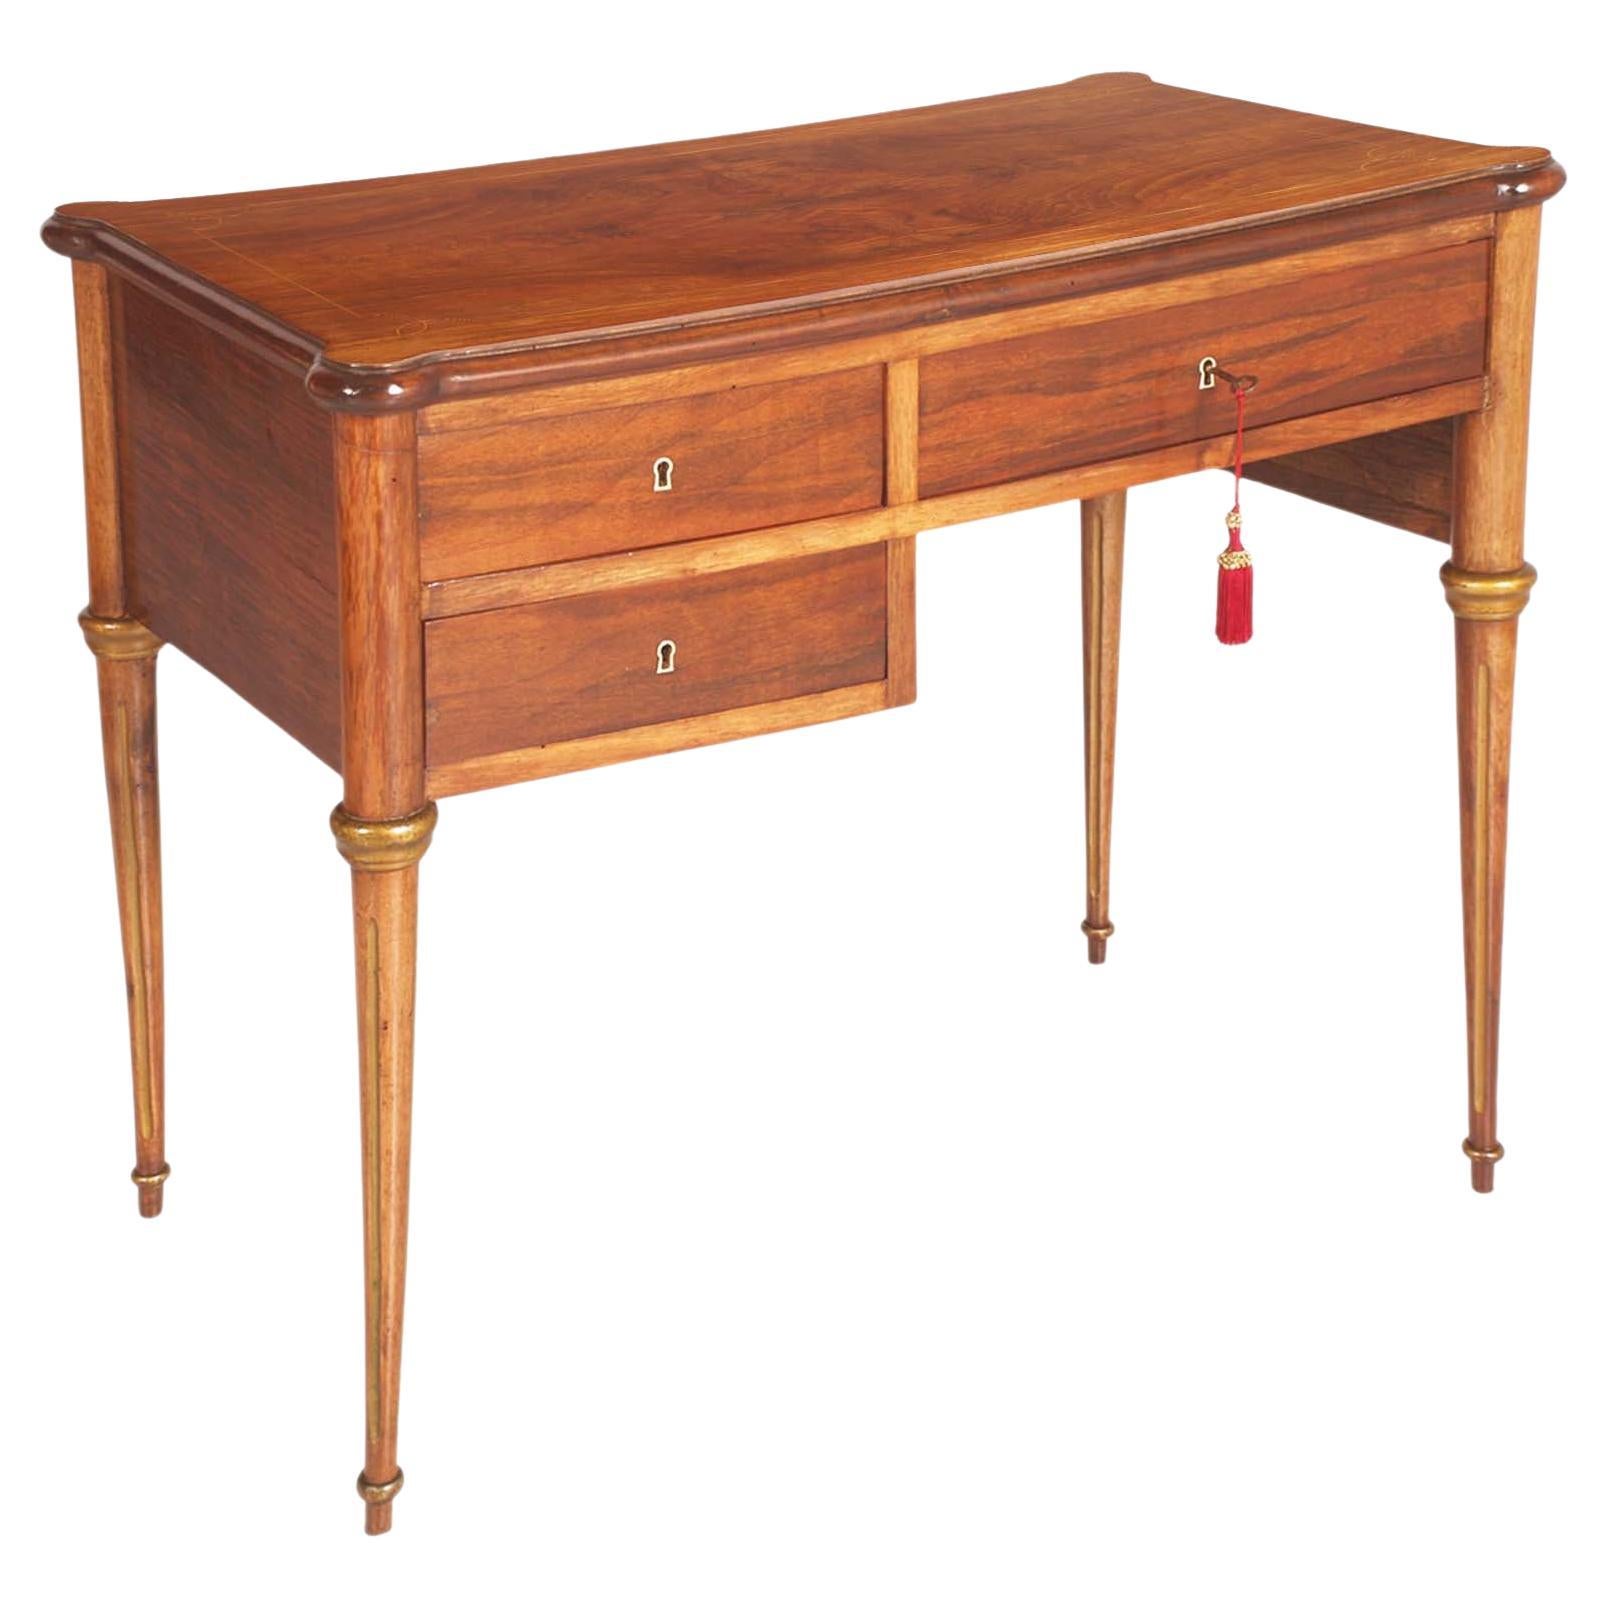 Early 20th Century Writing Desk in Walnut with Inlay by Meroni & Fossati For Sale